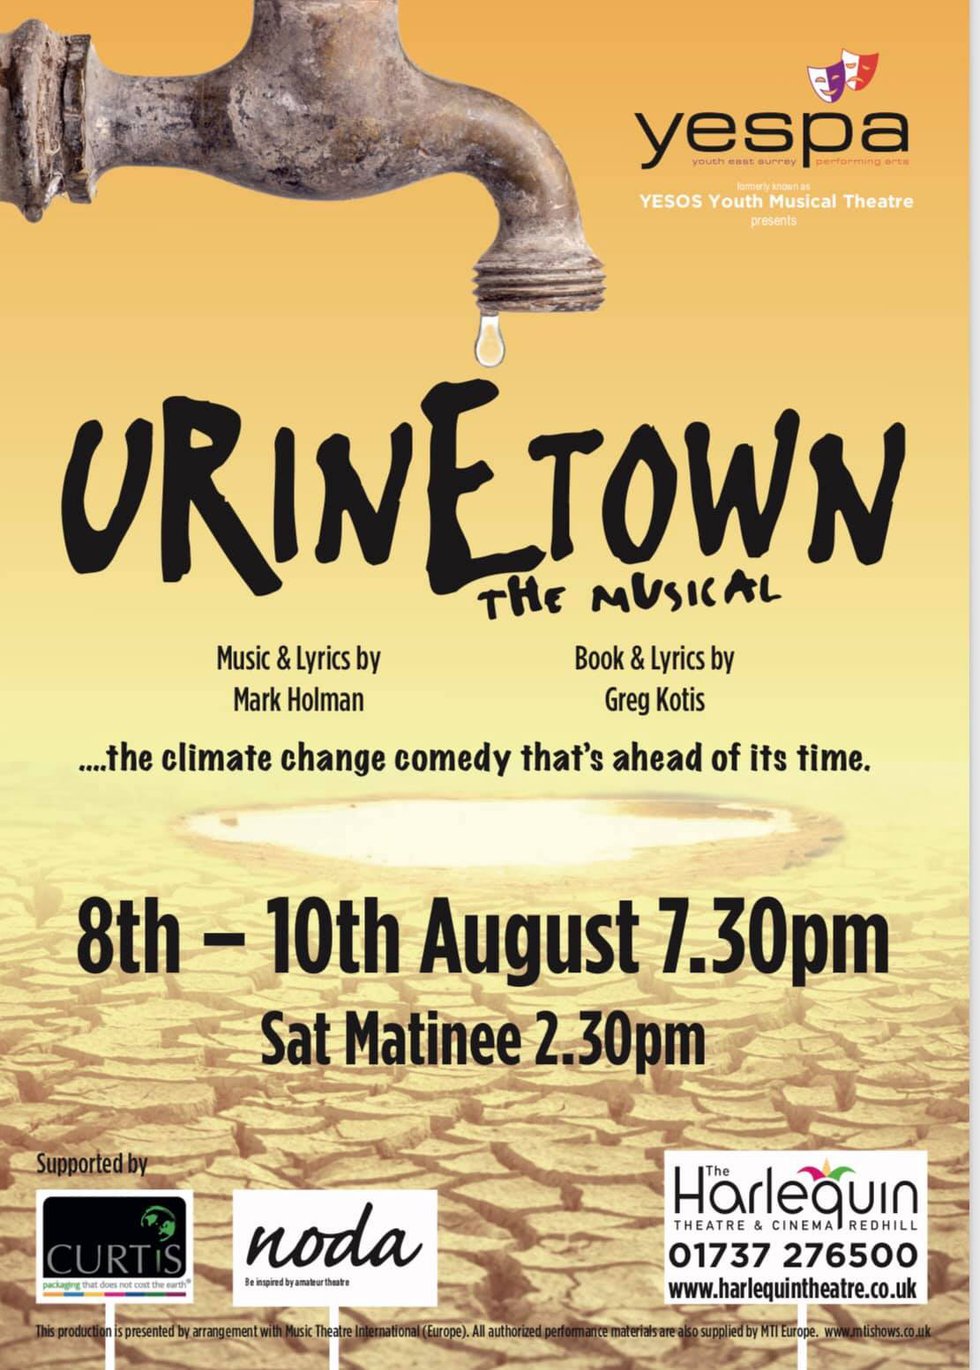 Urinetown flier front page image.jpg